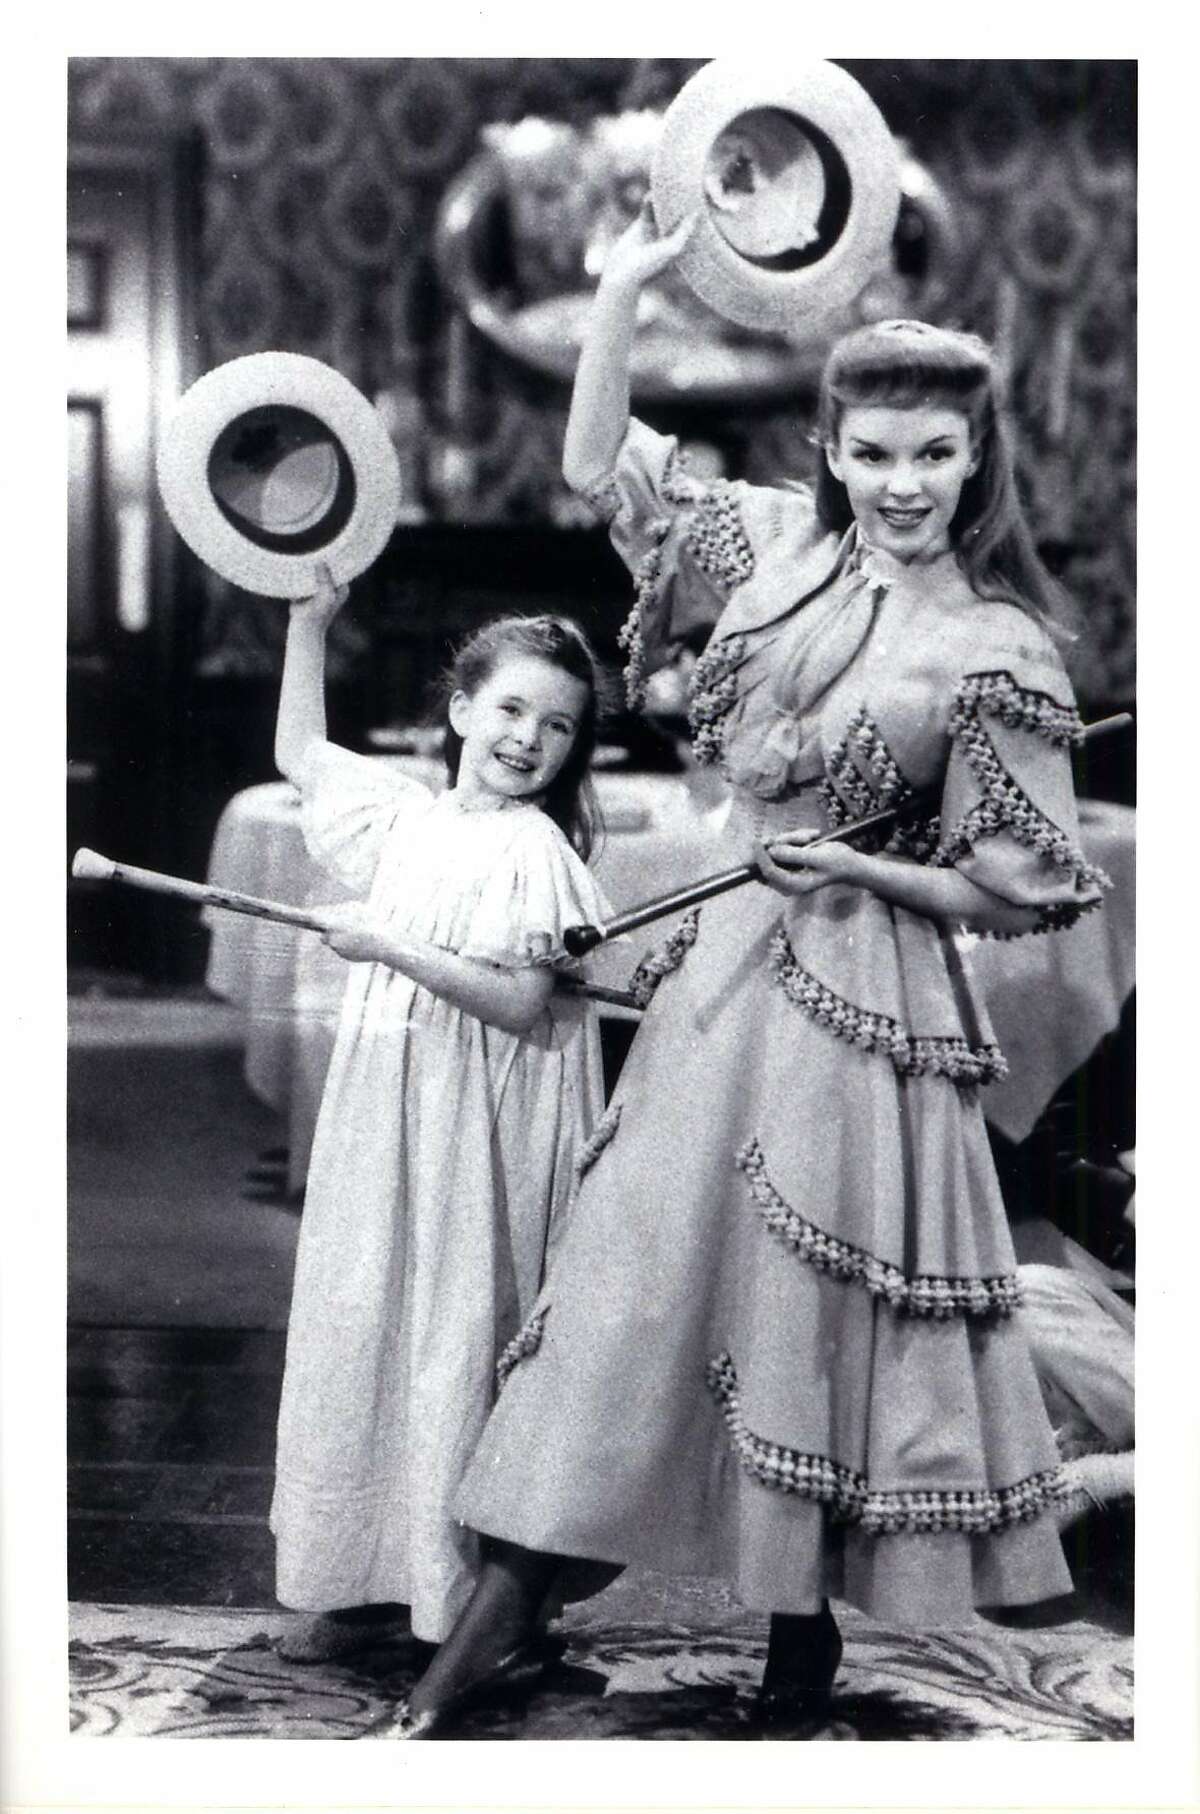 Margaret O'Brien and Judy Garland in " Meet me in St. Louis" 1944